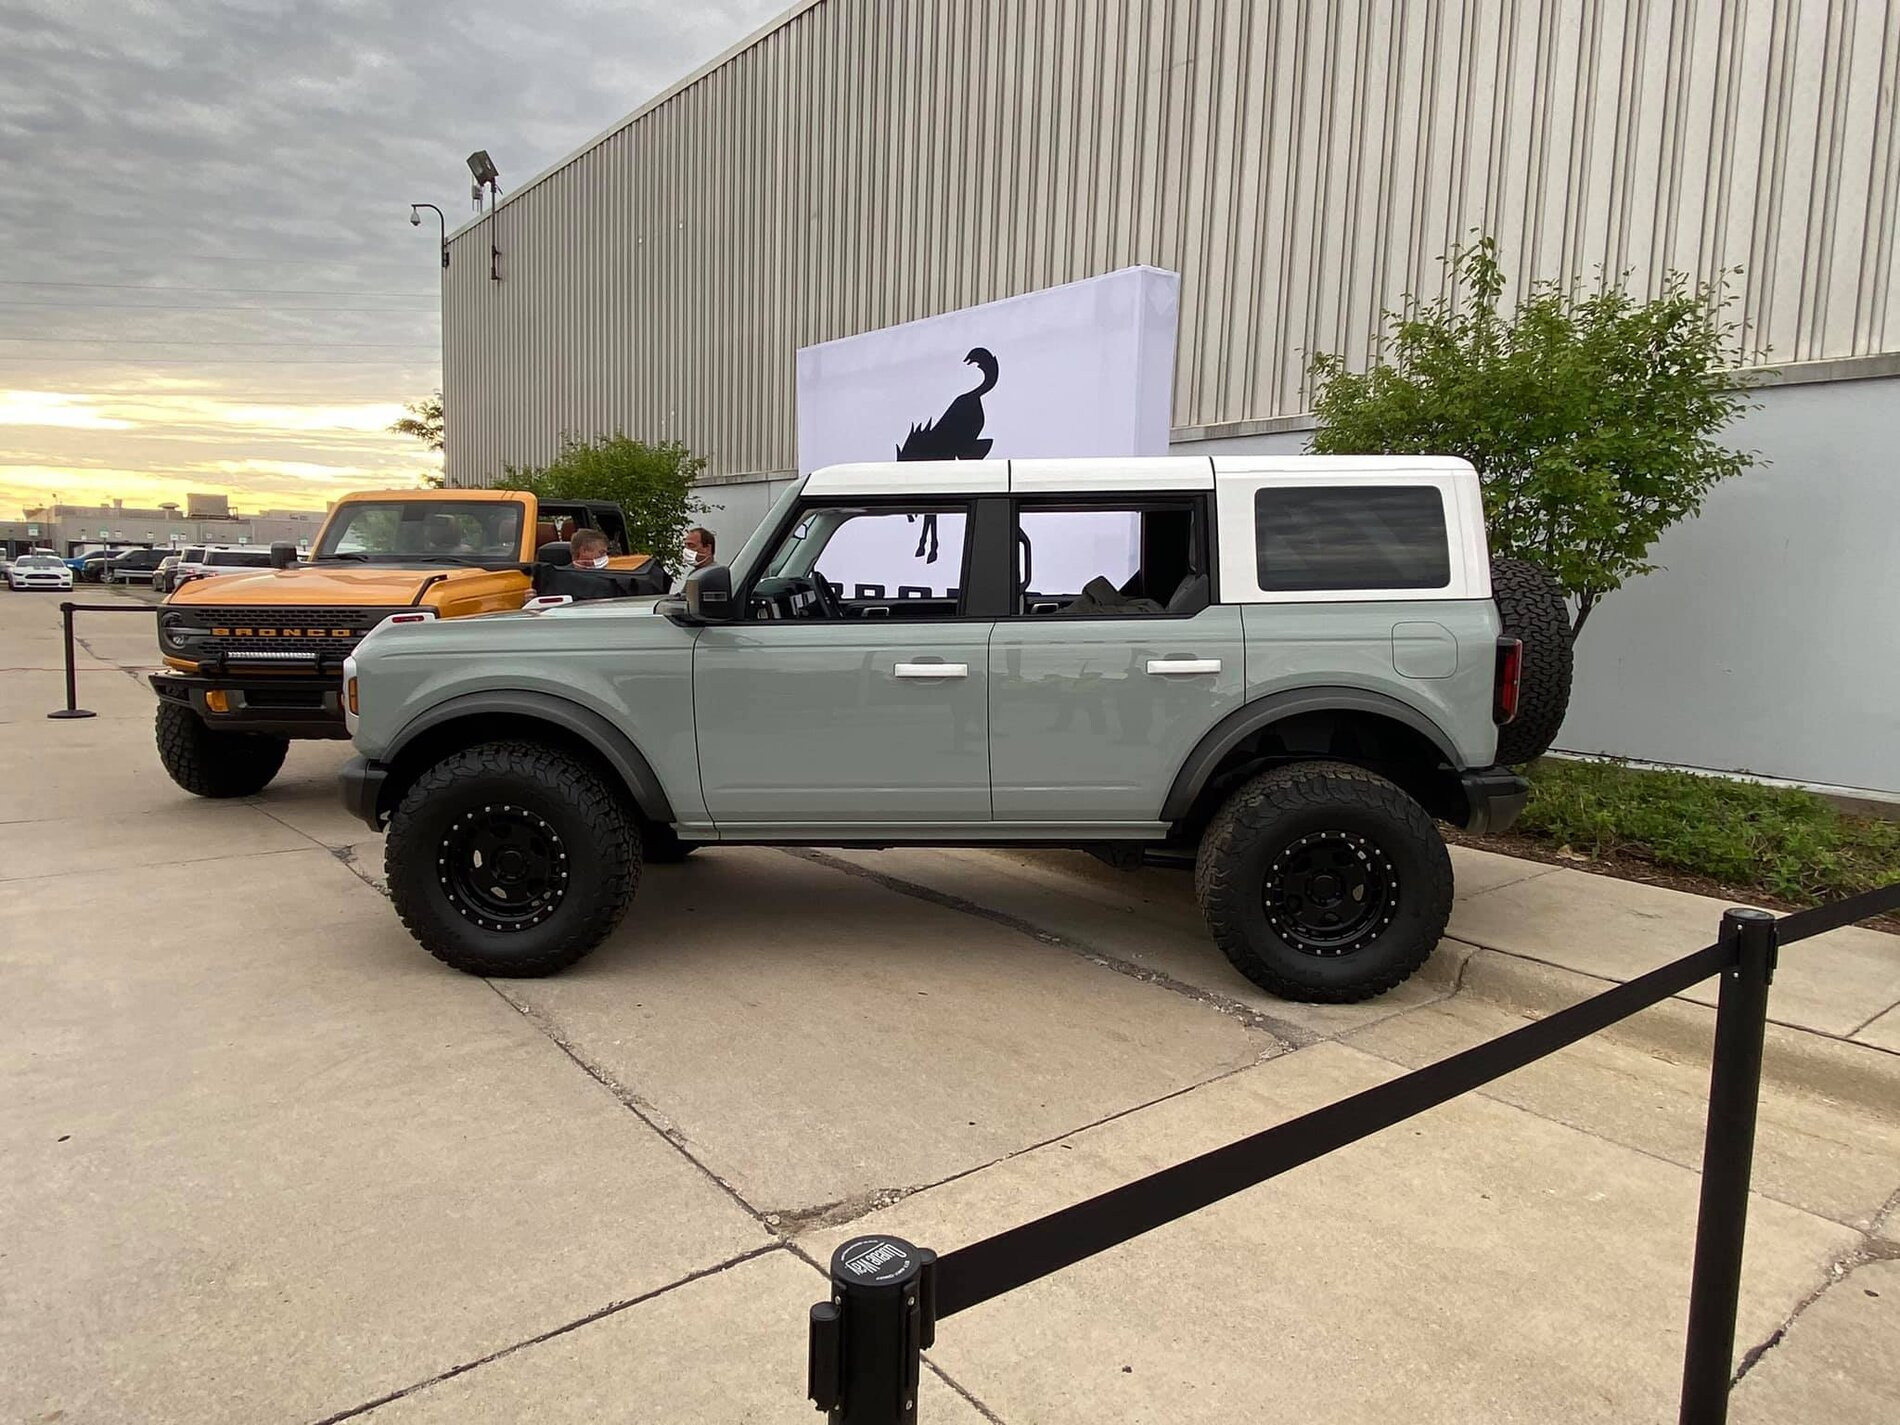 Ford Bronco CACTUS GRAY THREAD!!!! if you’re choosing cactus gray lemme know. I think it’s the best color available at the moment. 1596550376737